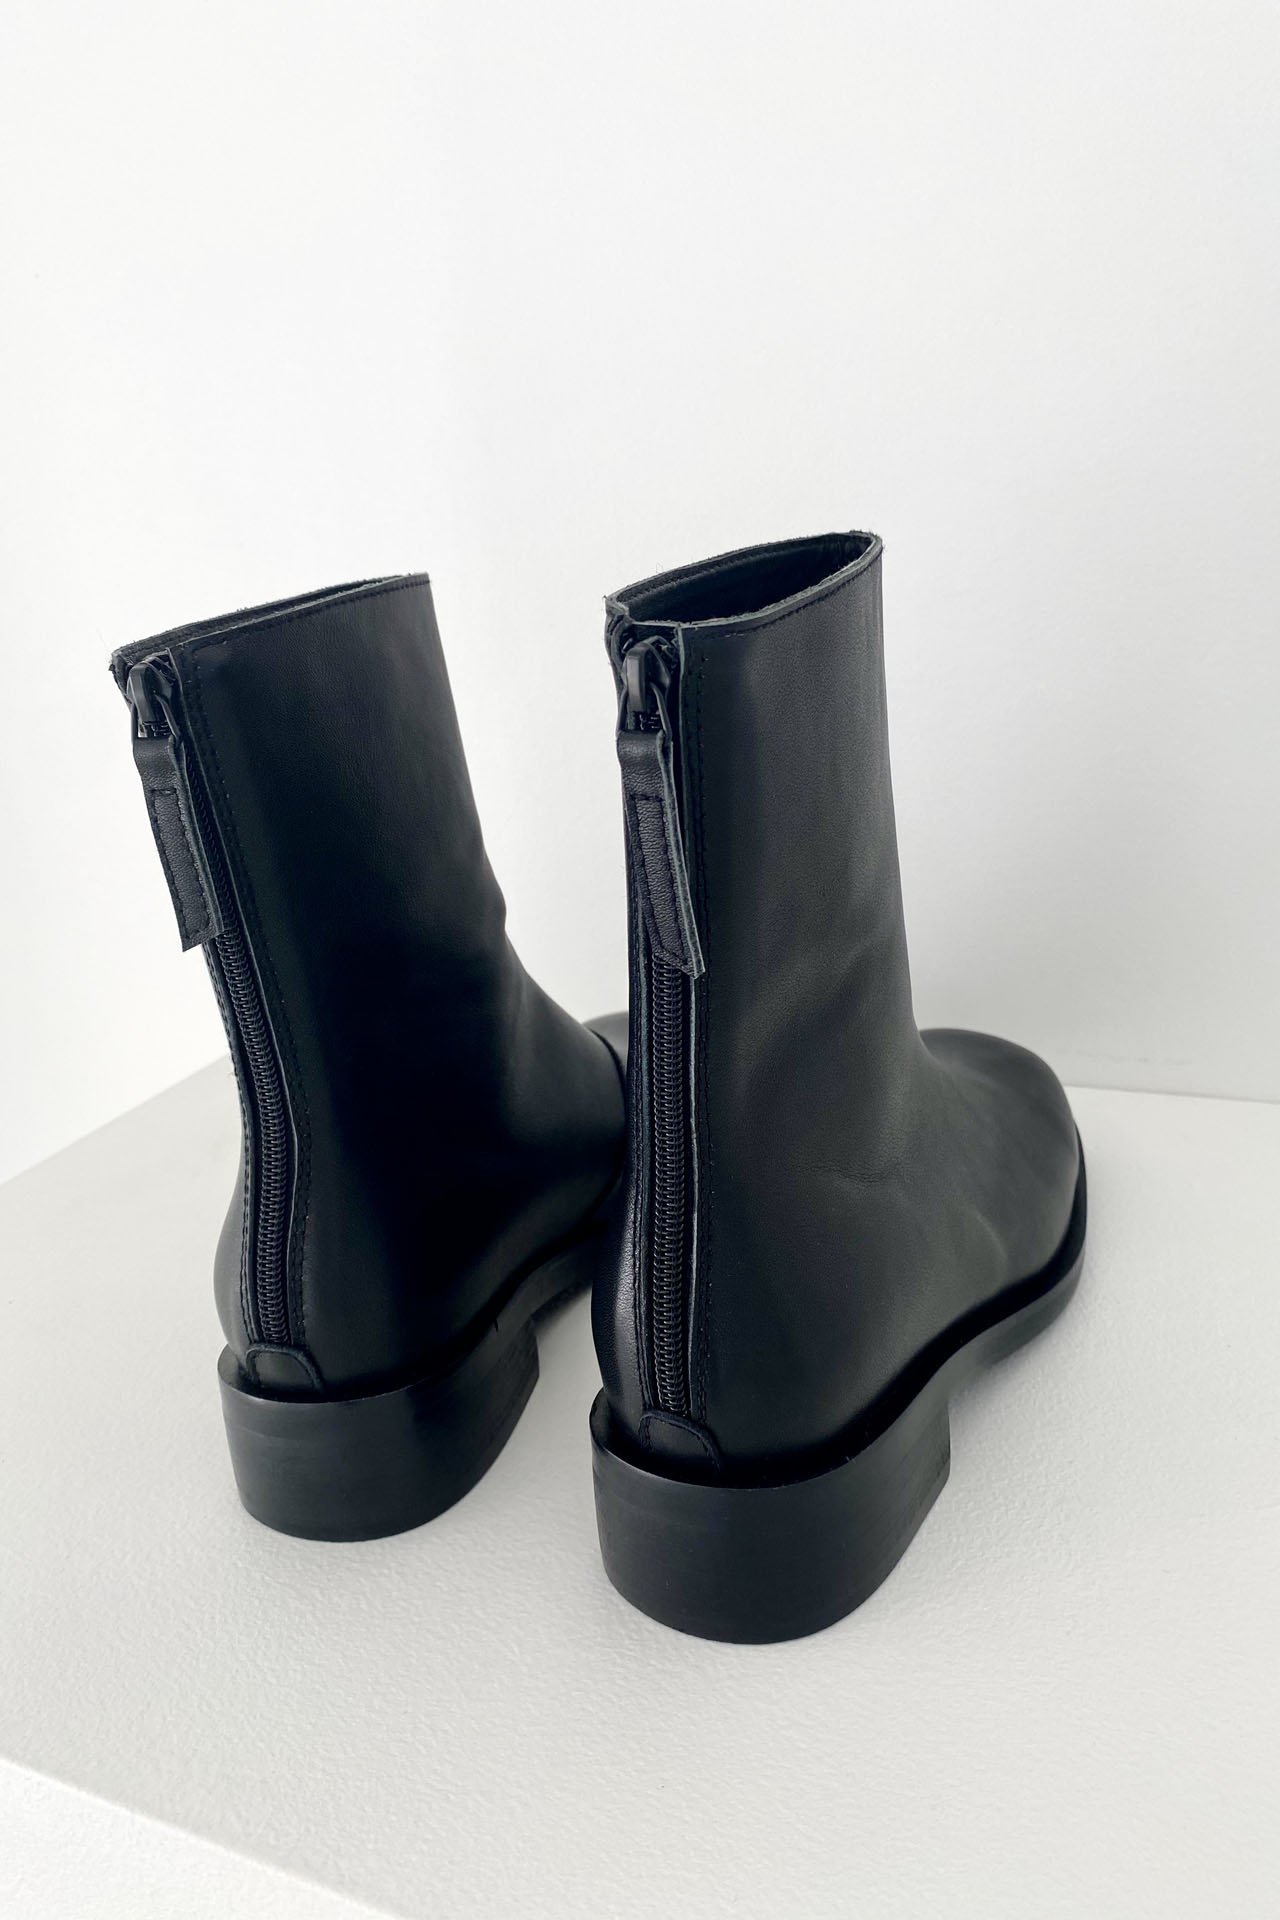 SQUARE SOFT LEATHER MIDDLE BOOTS BLACK